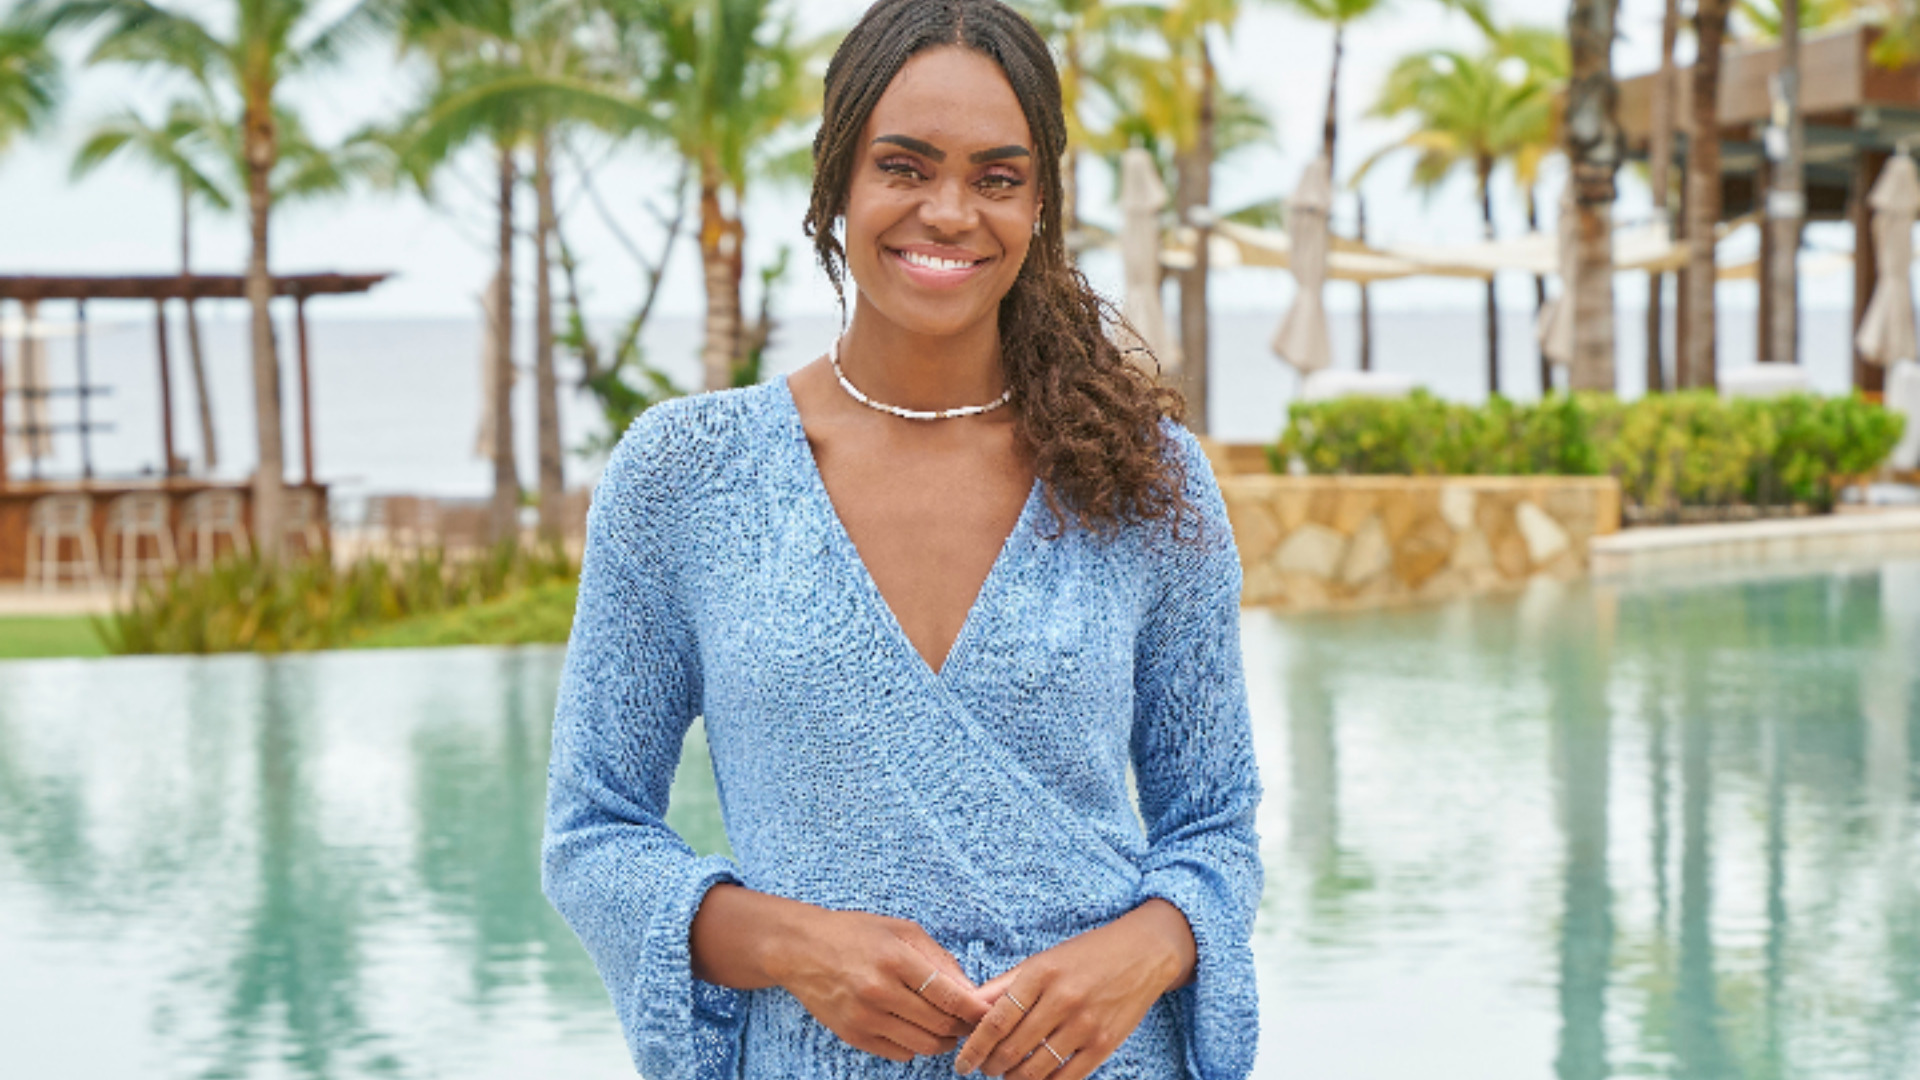 ‘The Bachelorette’ Spoilers: Is Michelle Young Engaged to Nayte Olukoya or Brandon Jones? Reality Steve Addresses Final Pick Rumors Ahead of the Finale